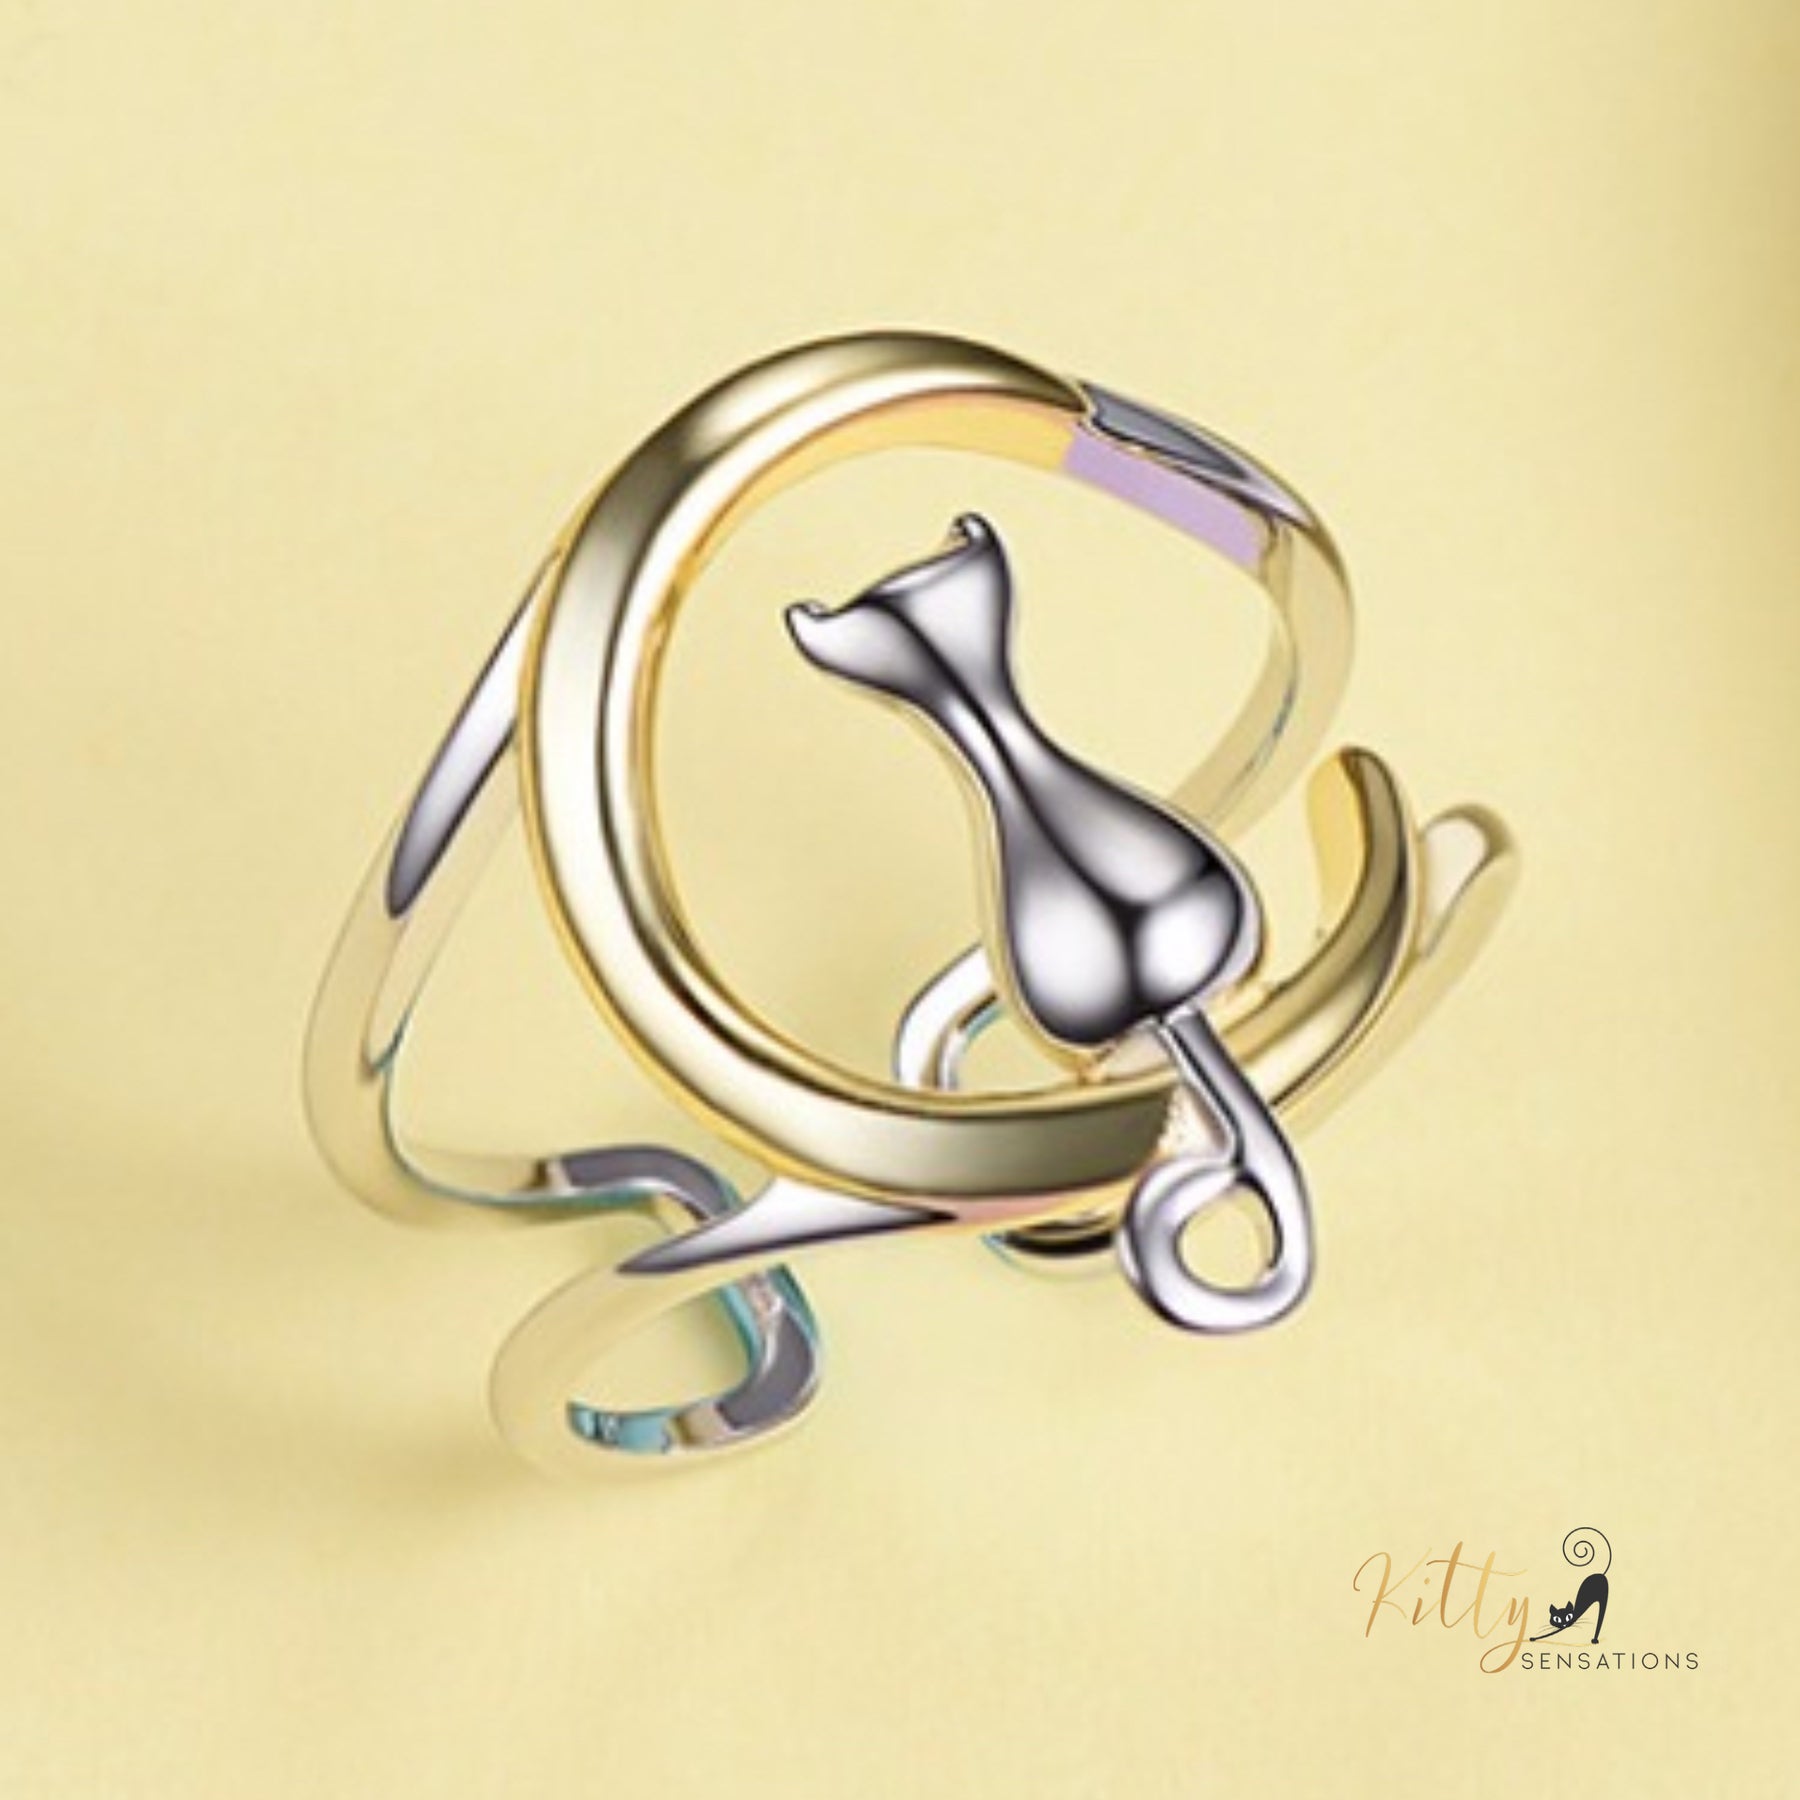 Gold and Silver Moon Kitty Double-Band Ring in Solid 925 Sterling Silver (18K Gold Plated) - Adjustable Size